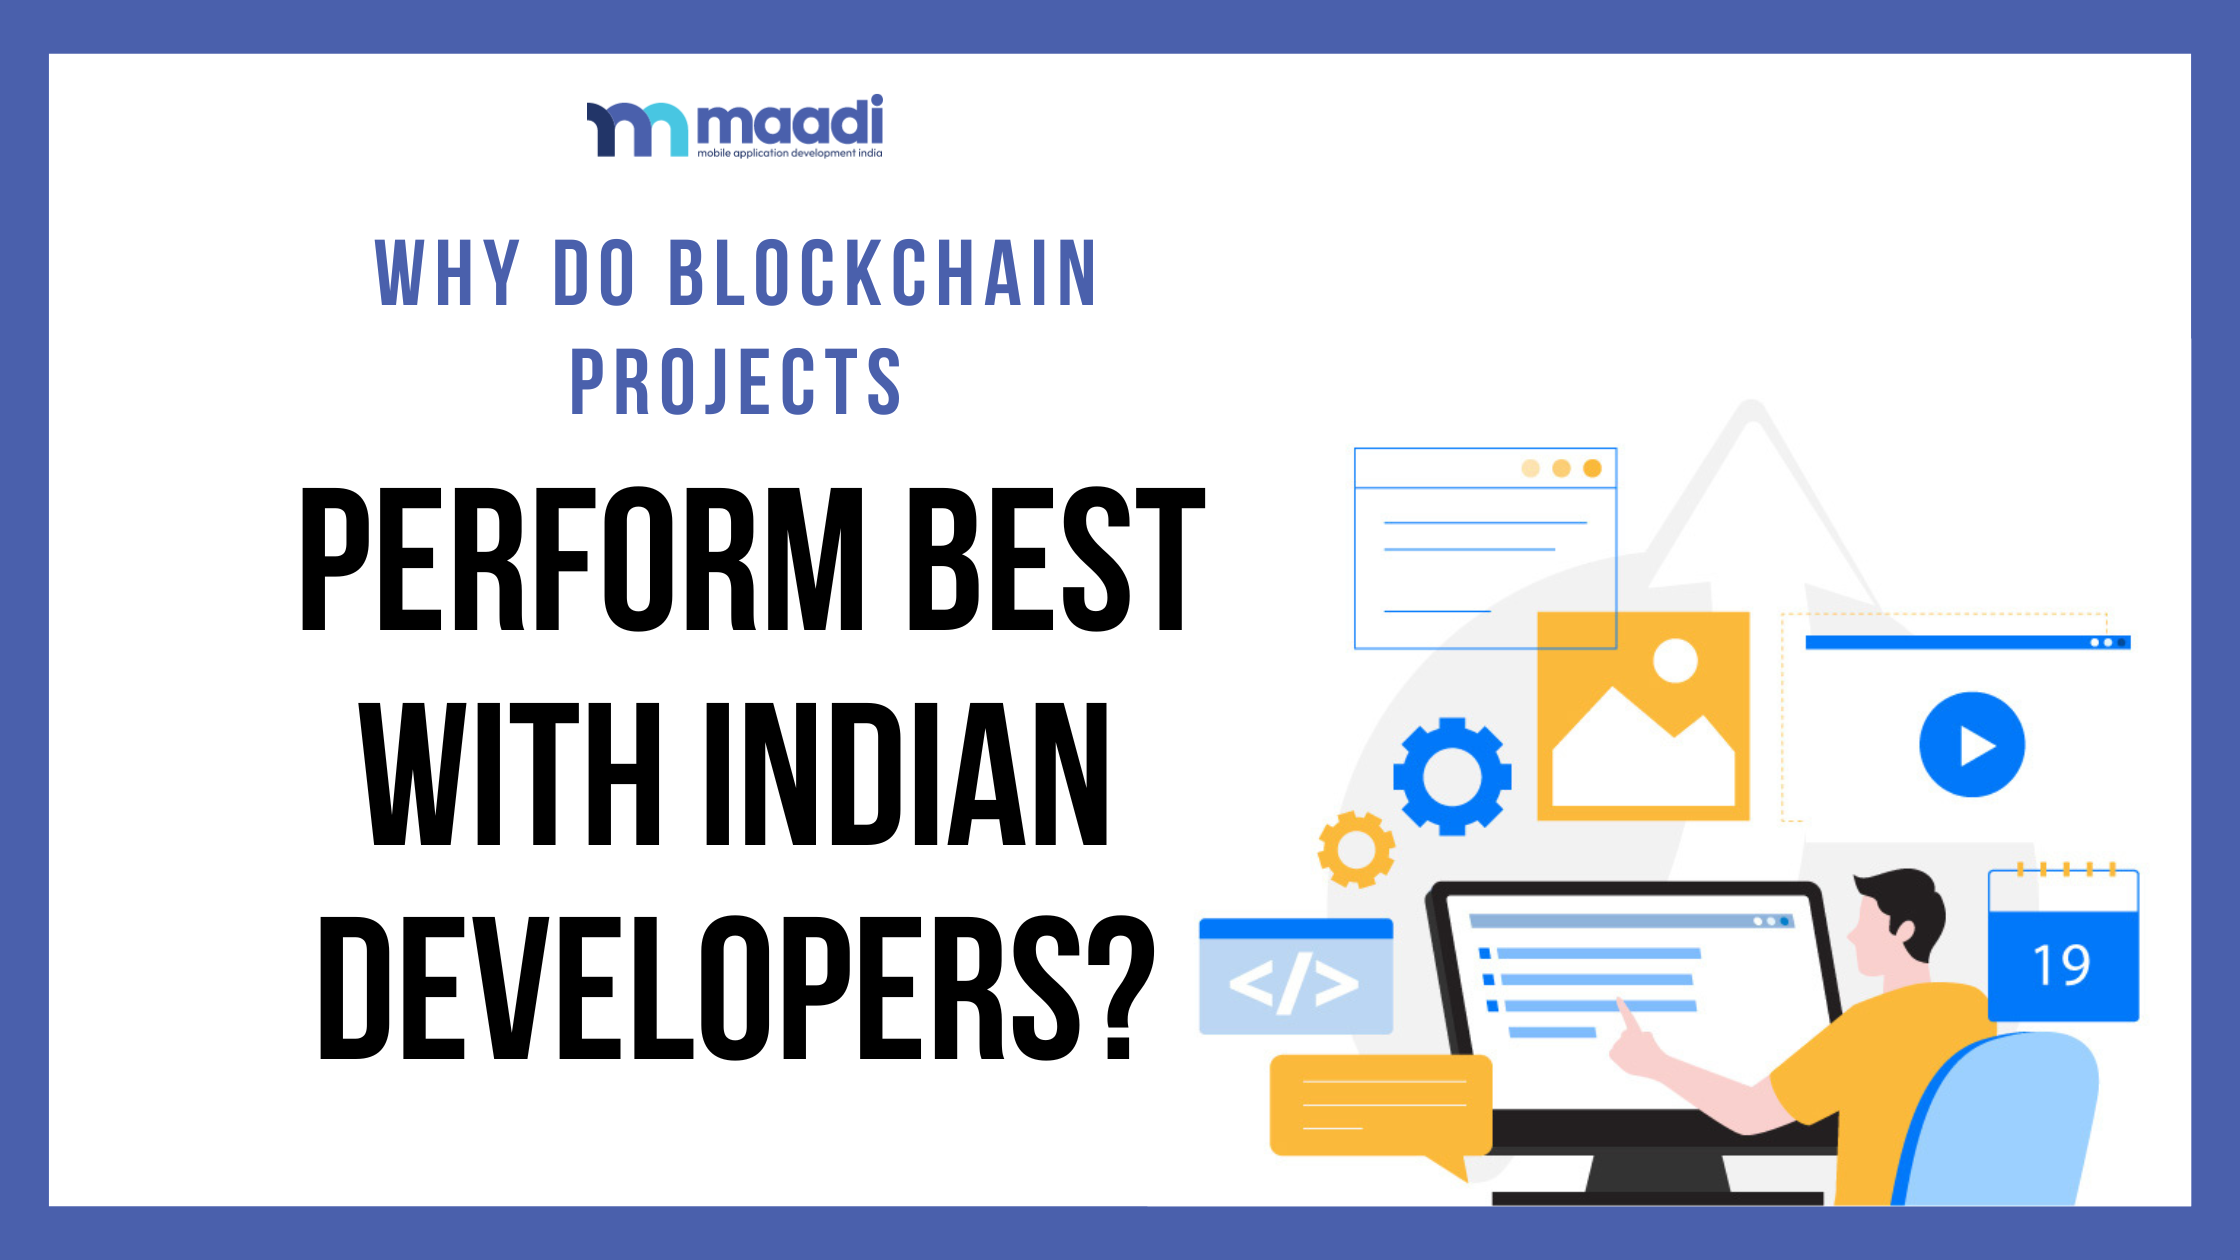 Why Do Blockchain Projects with Indian Developers Succeed the Best?